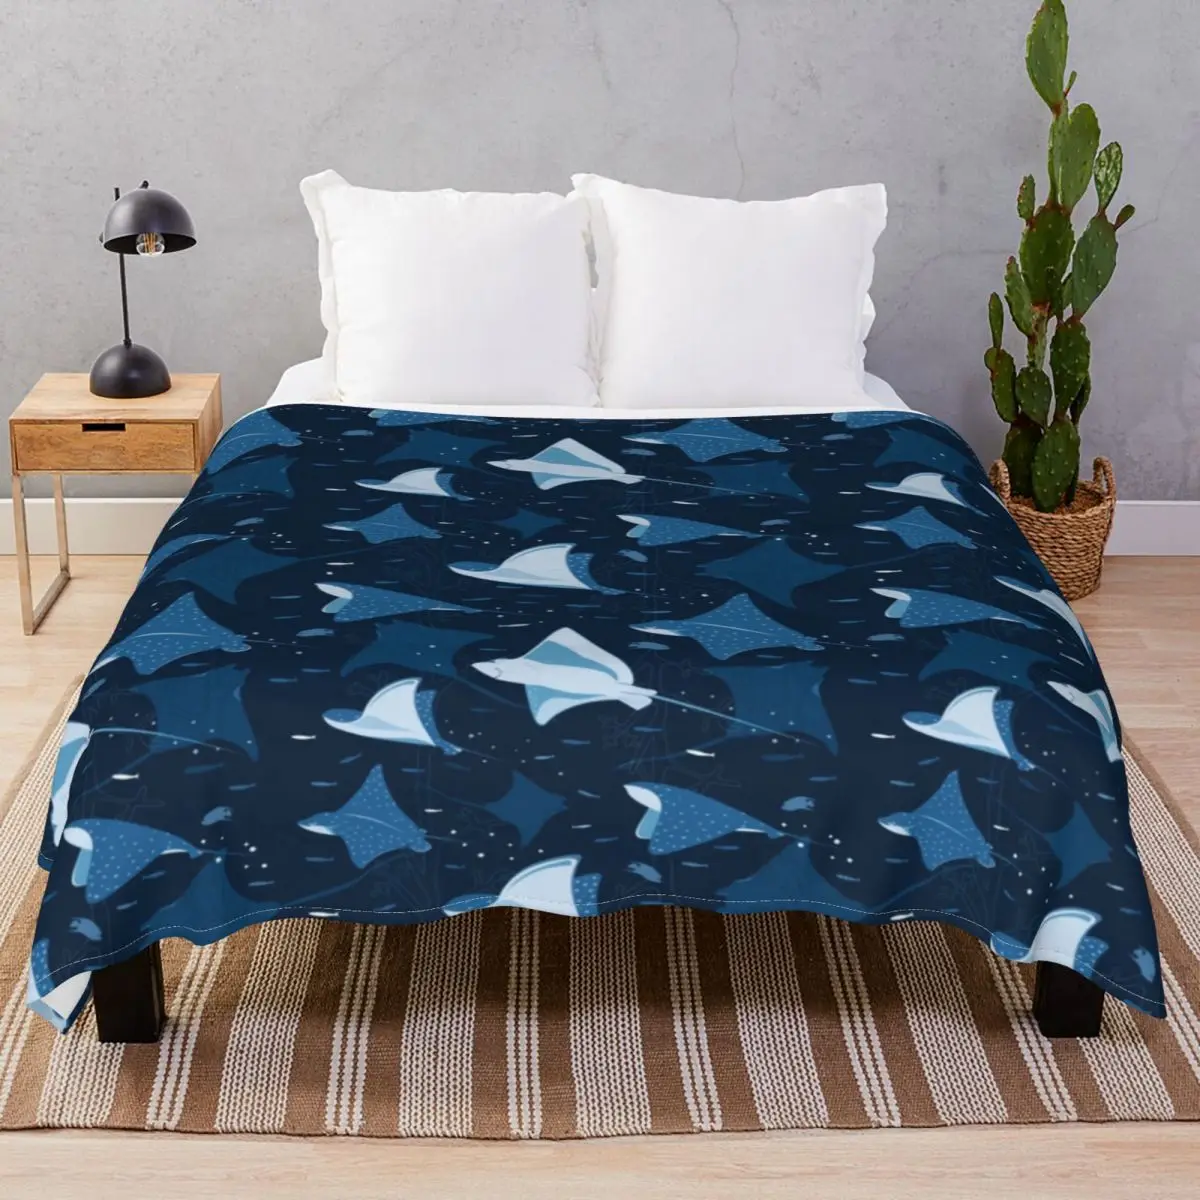 Flying Stingrays Blue Blankets Flannel Printed Super Warm Throw Blanket for Bedding Home Couch Travel Office